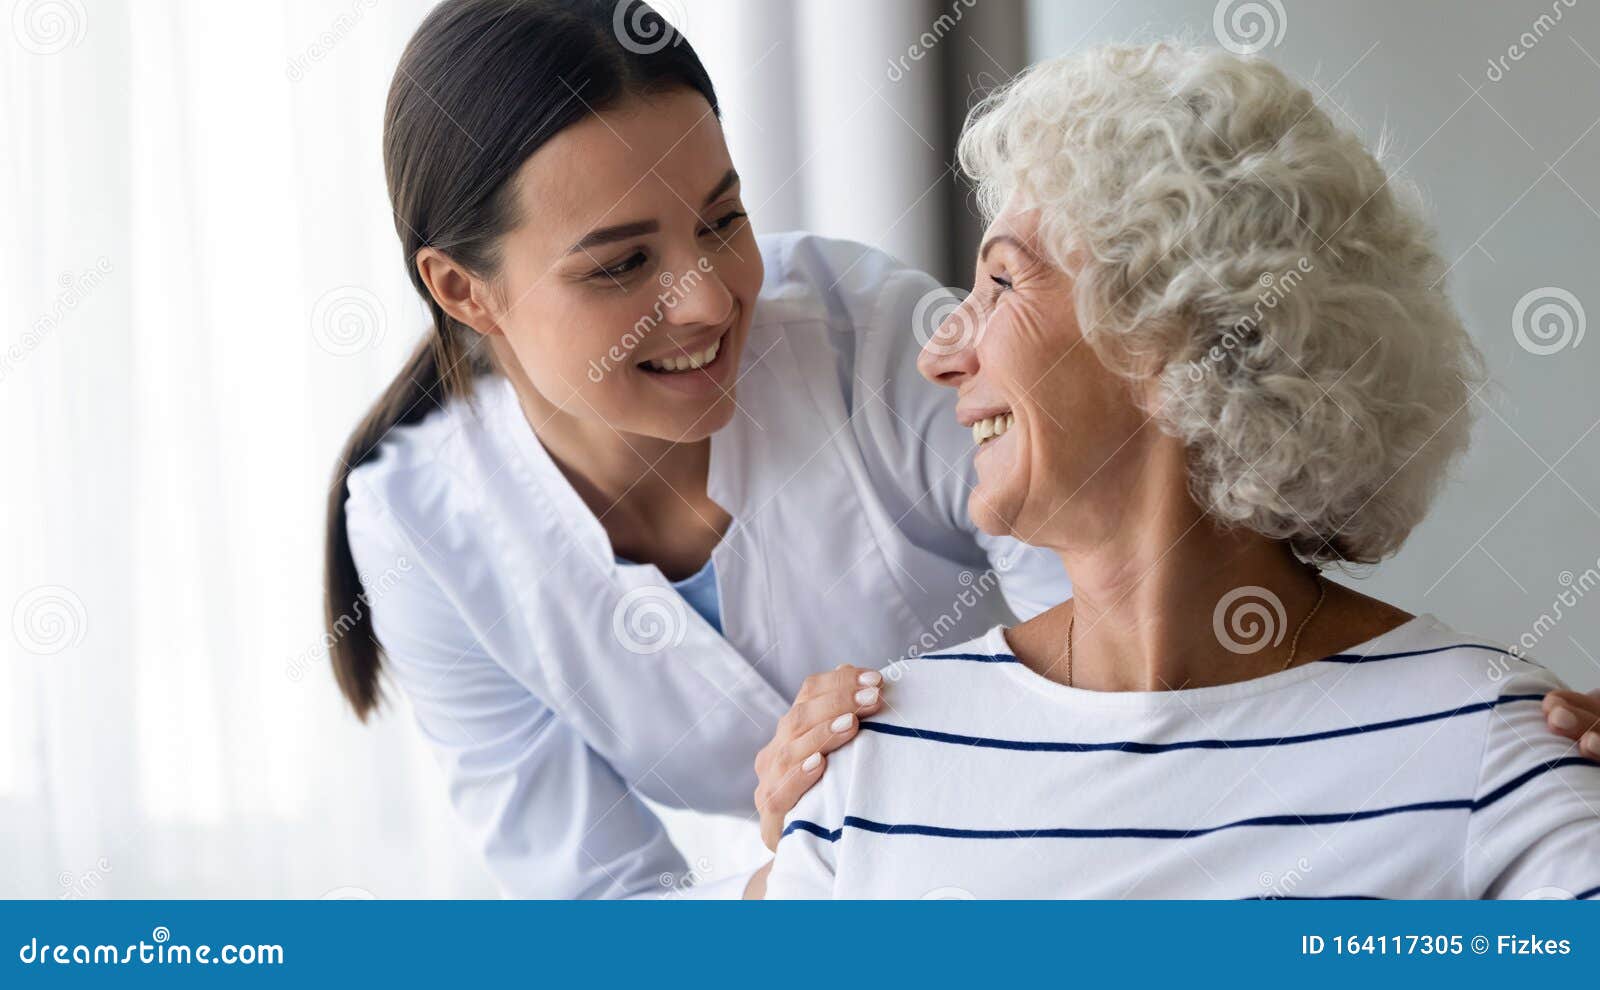 caring smiling young nurse taking care of elder grandma patient